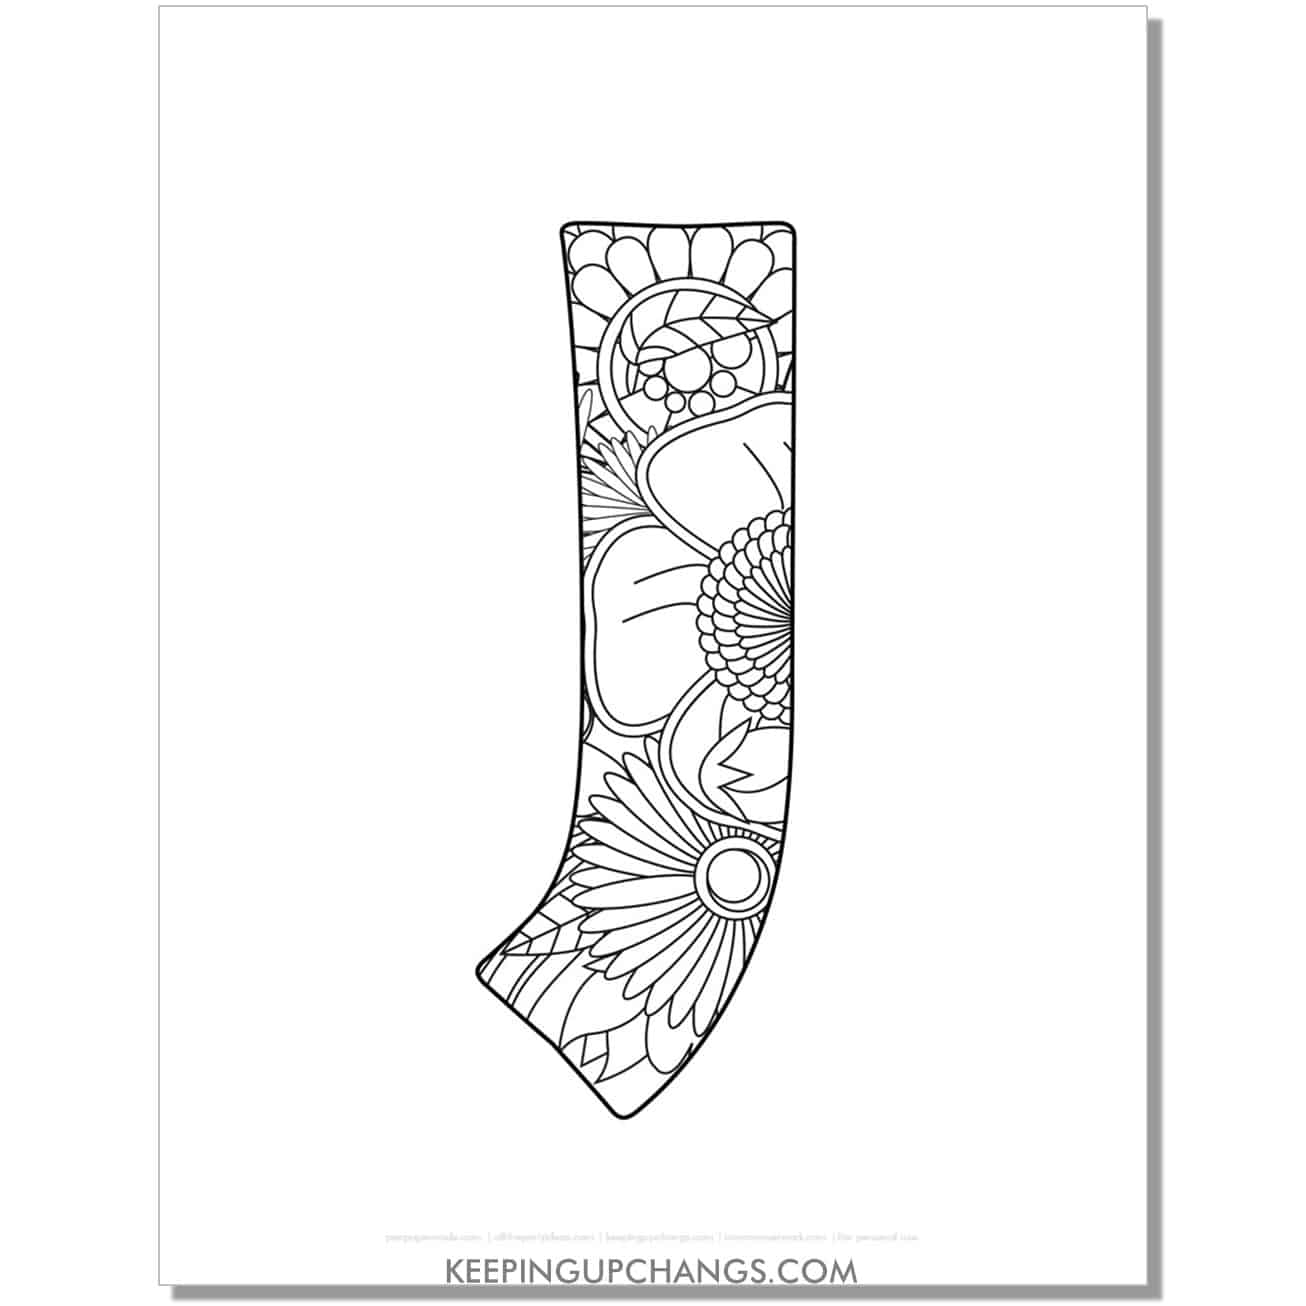 free letter j to color, complex mandala zentangle for adults.